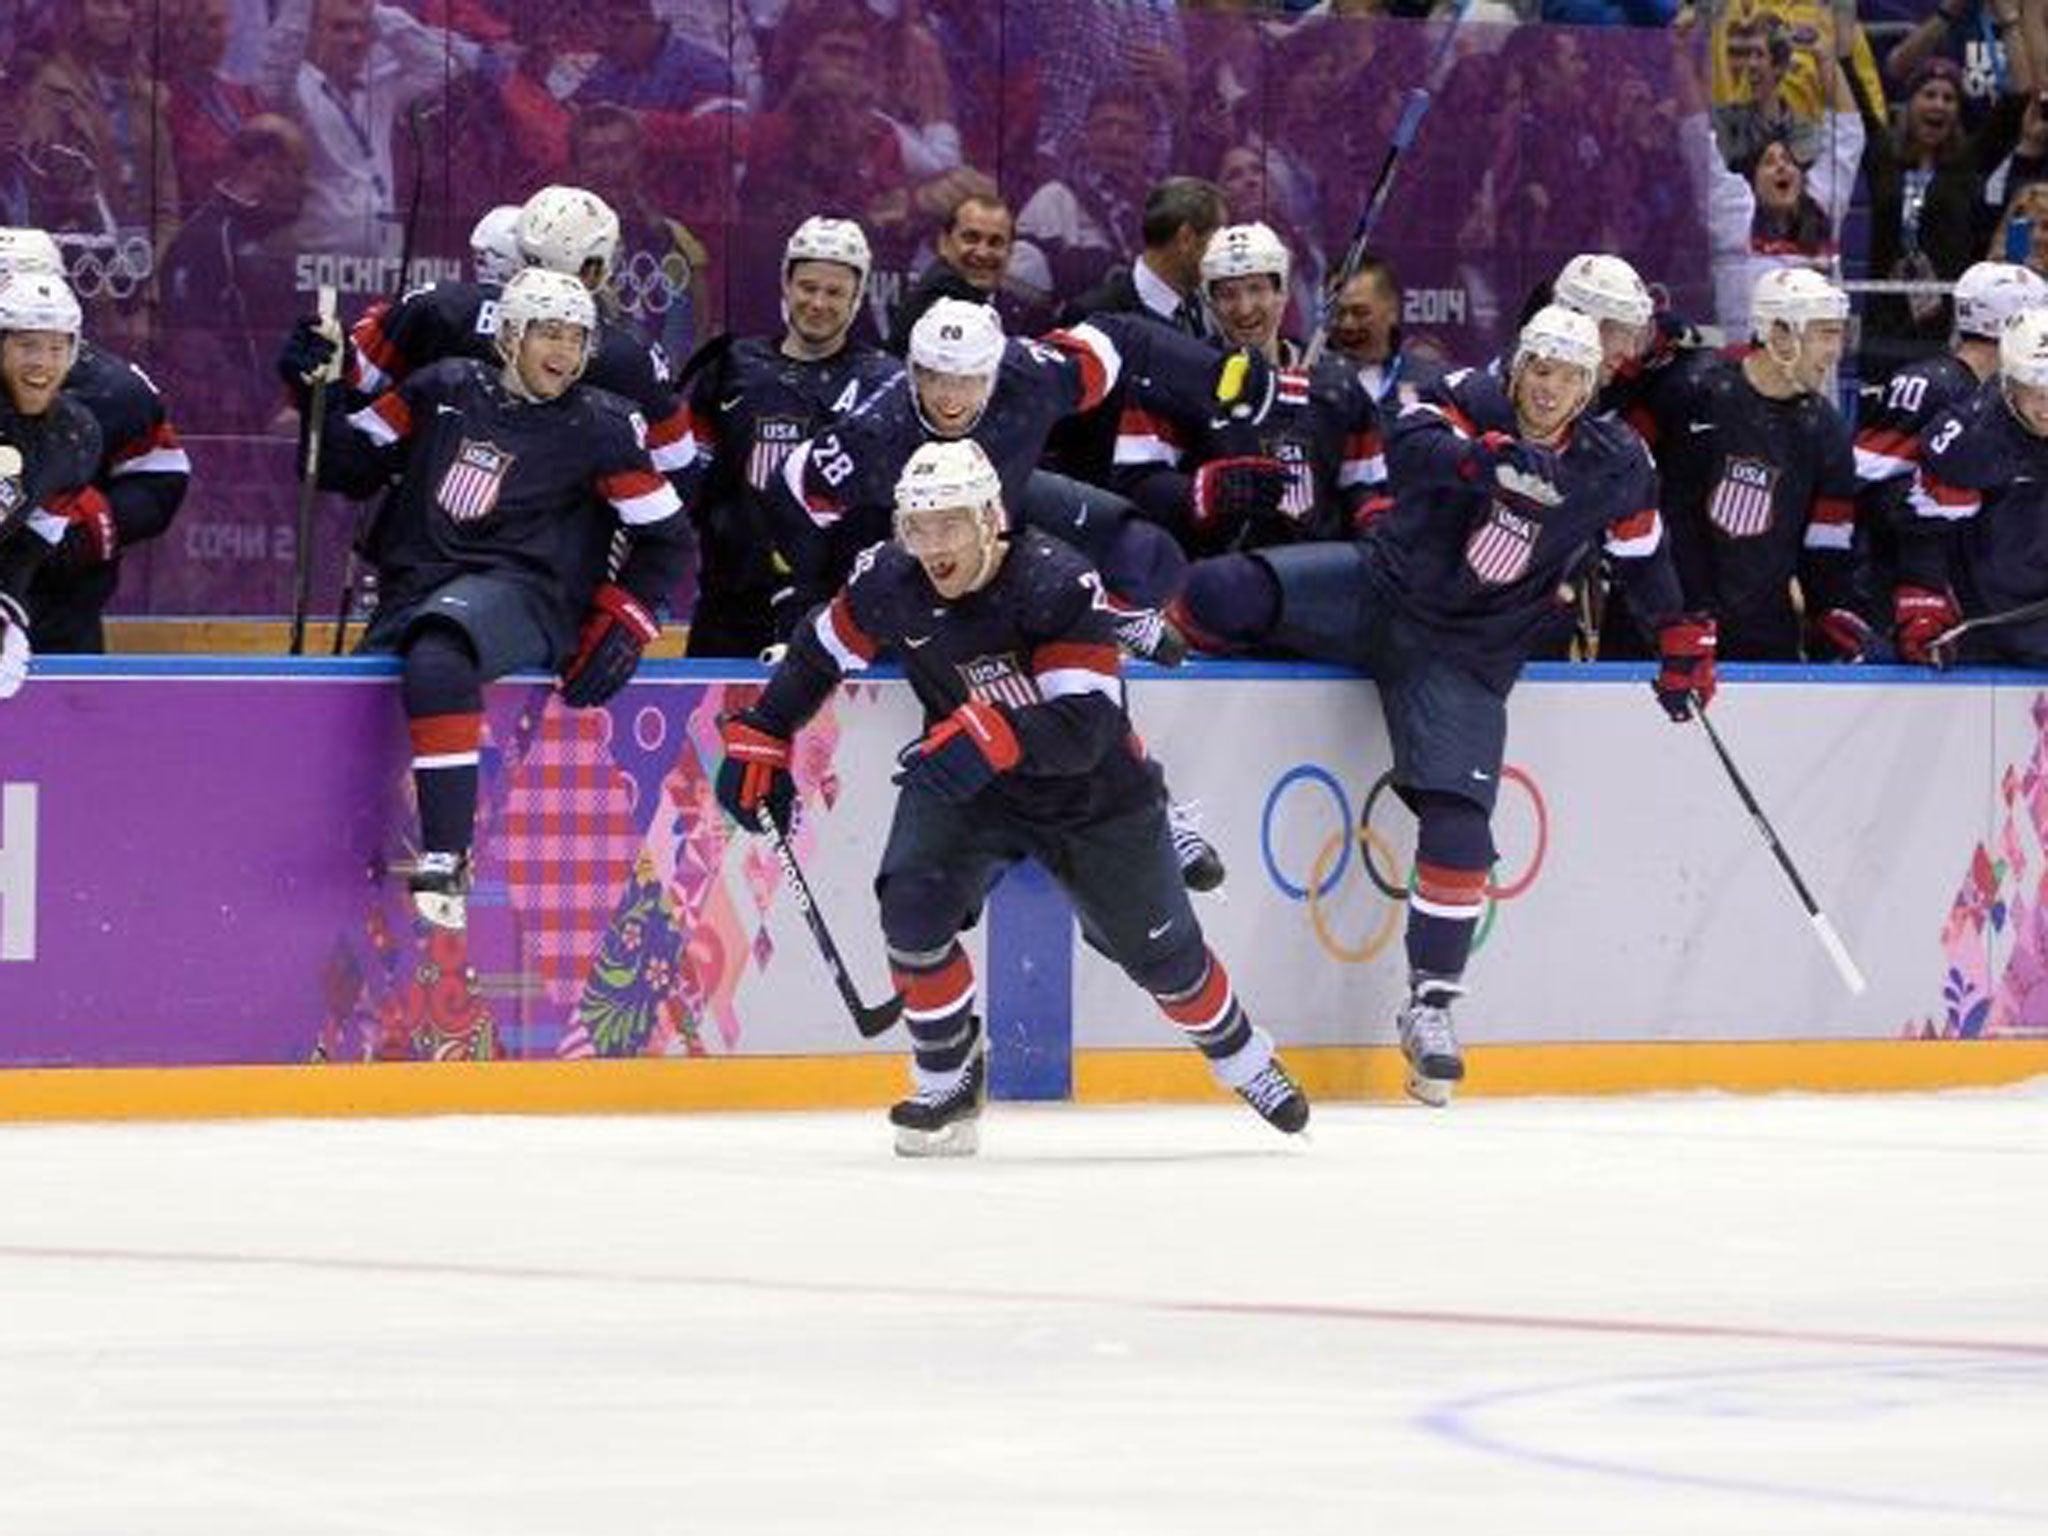 Ice one: TJ Oshie hits the winner, then is joined by his team-mates